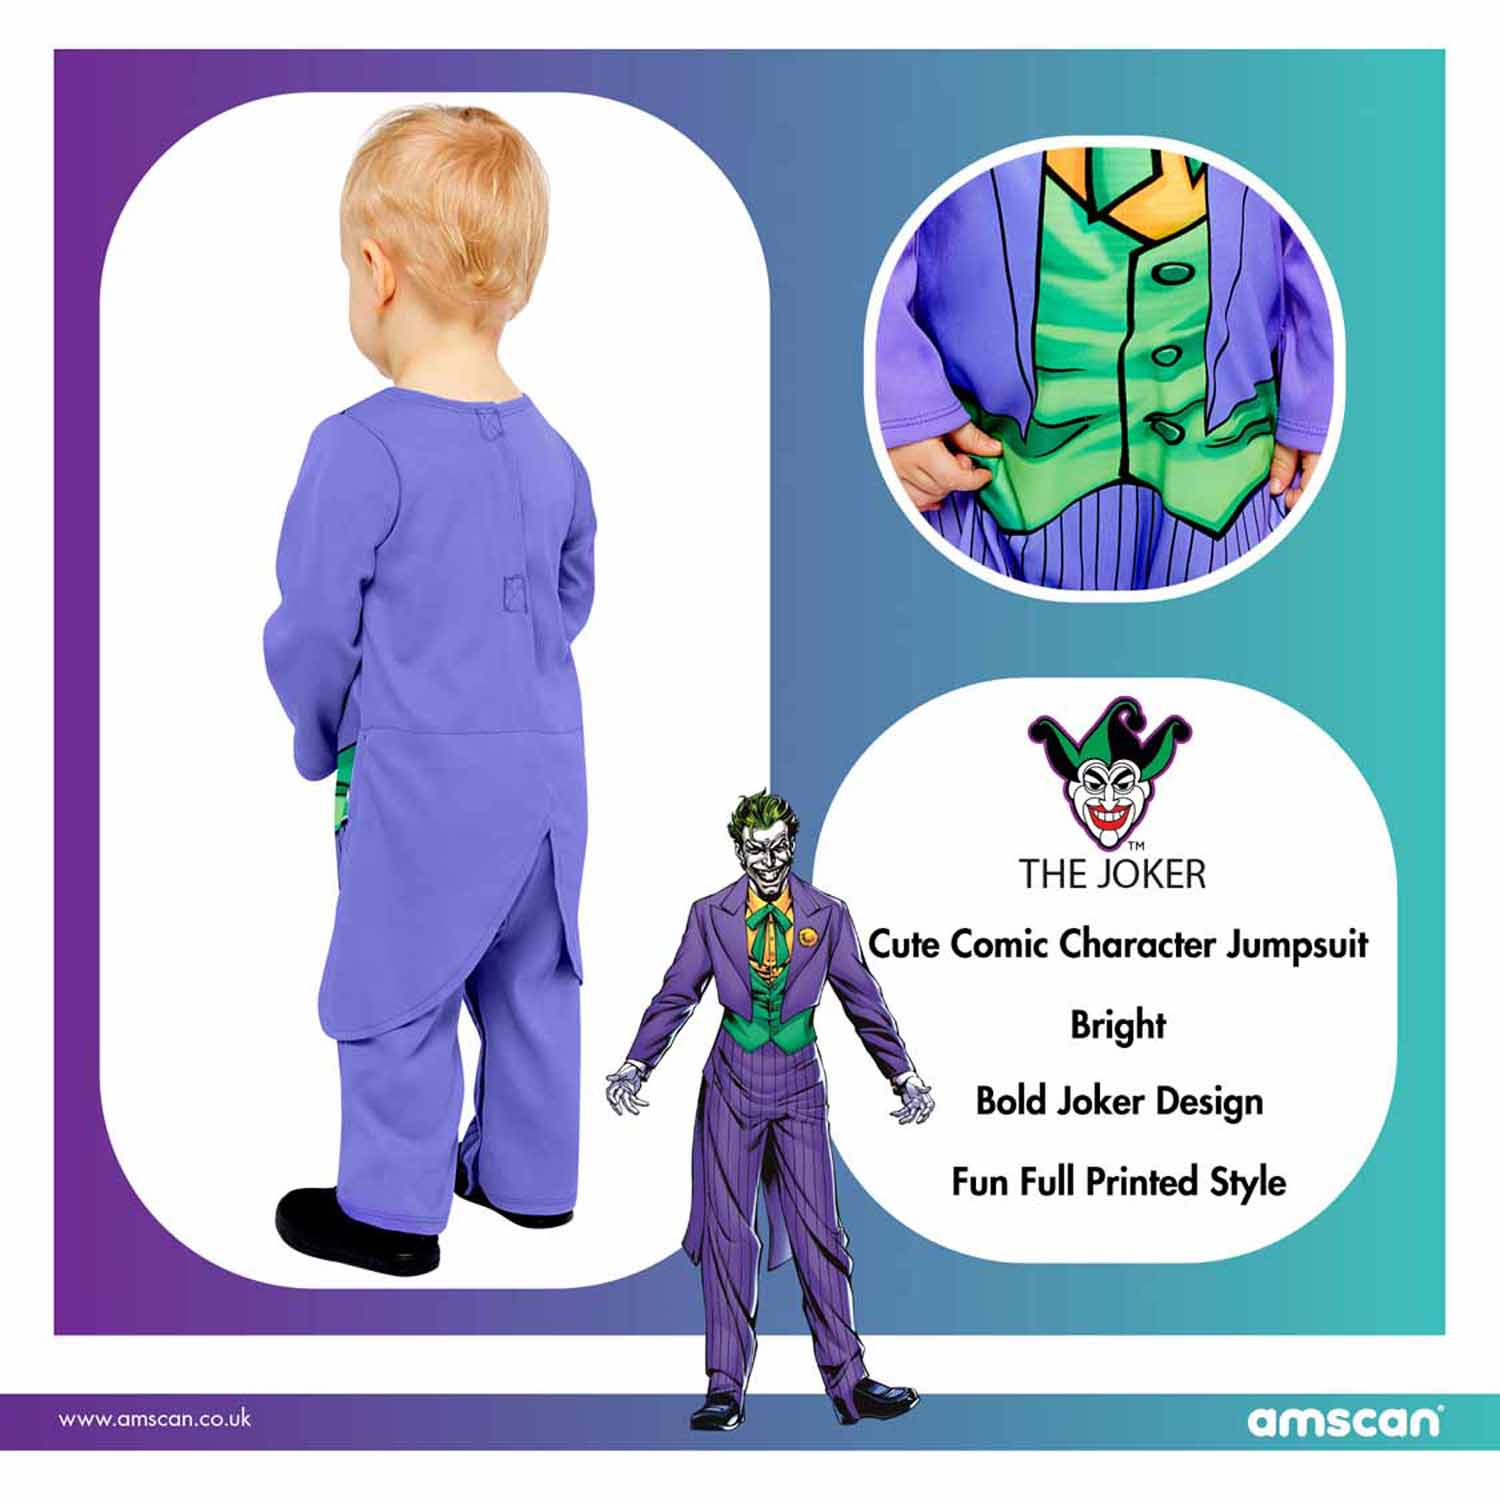 Joker Comic Book Style Costume - Age 6-12 Months - 1 PC : Amscan ...